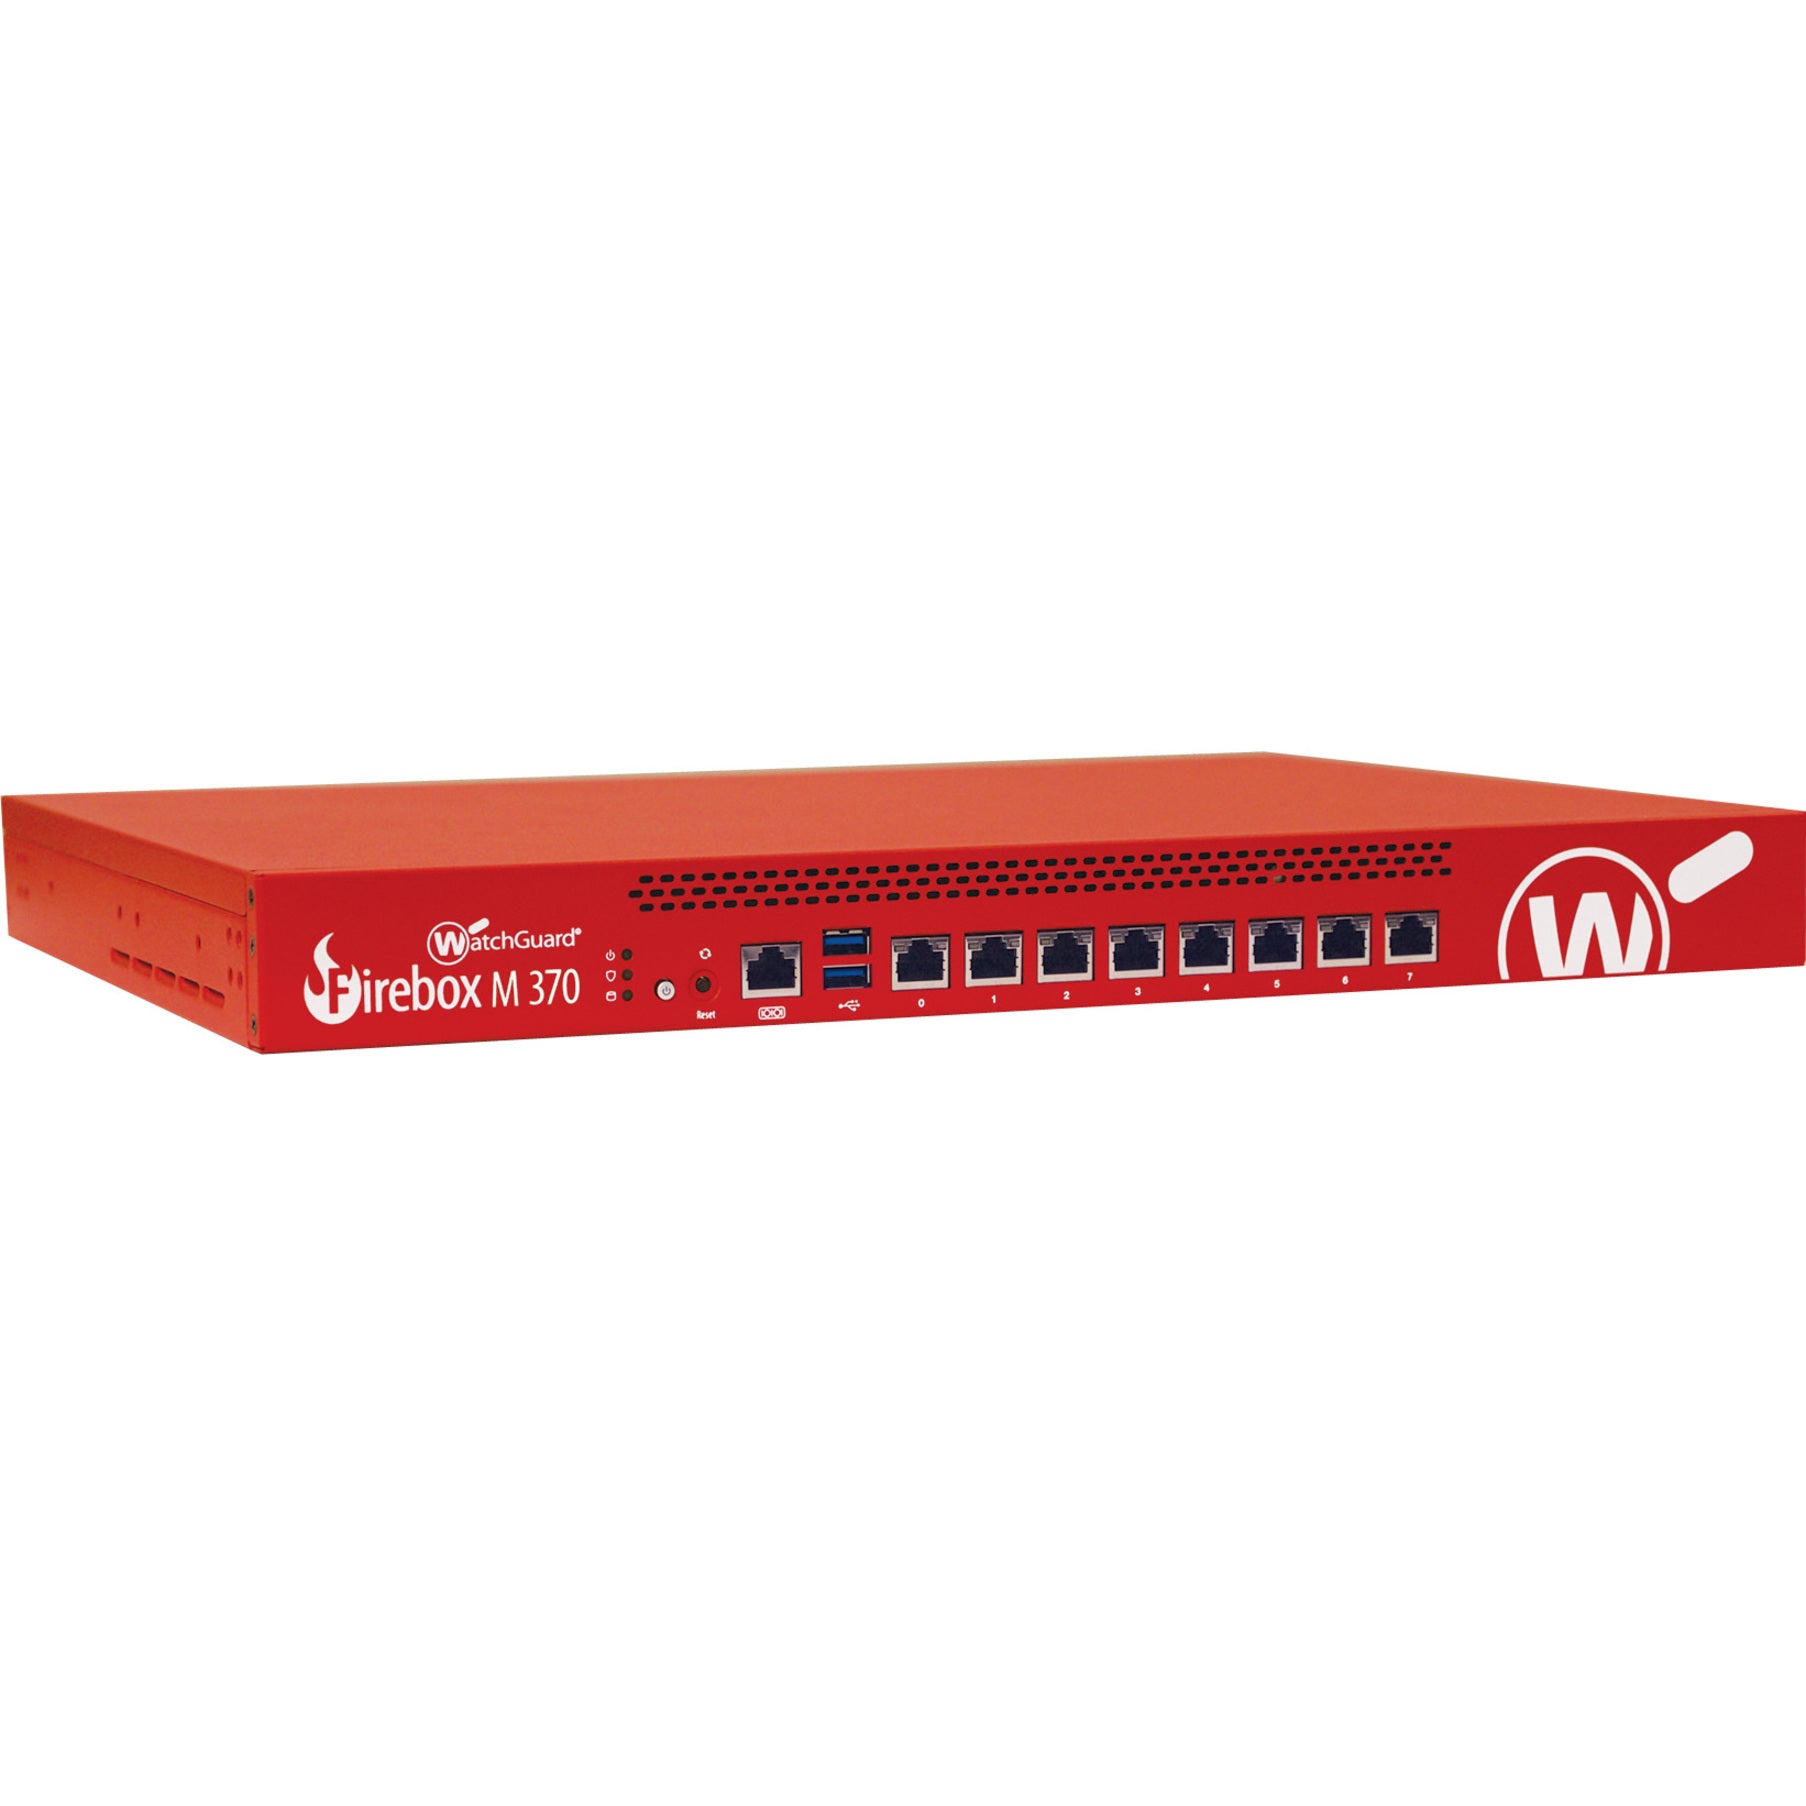 WatchGuard WGM37643 Firebox M370 Network Security/Firewall Appliance, 3-yr Total Security Suite